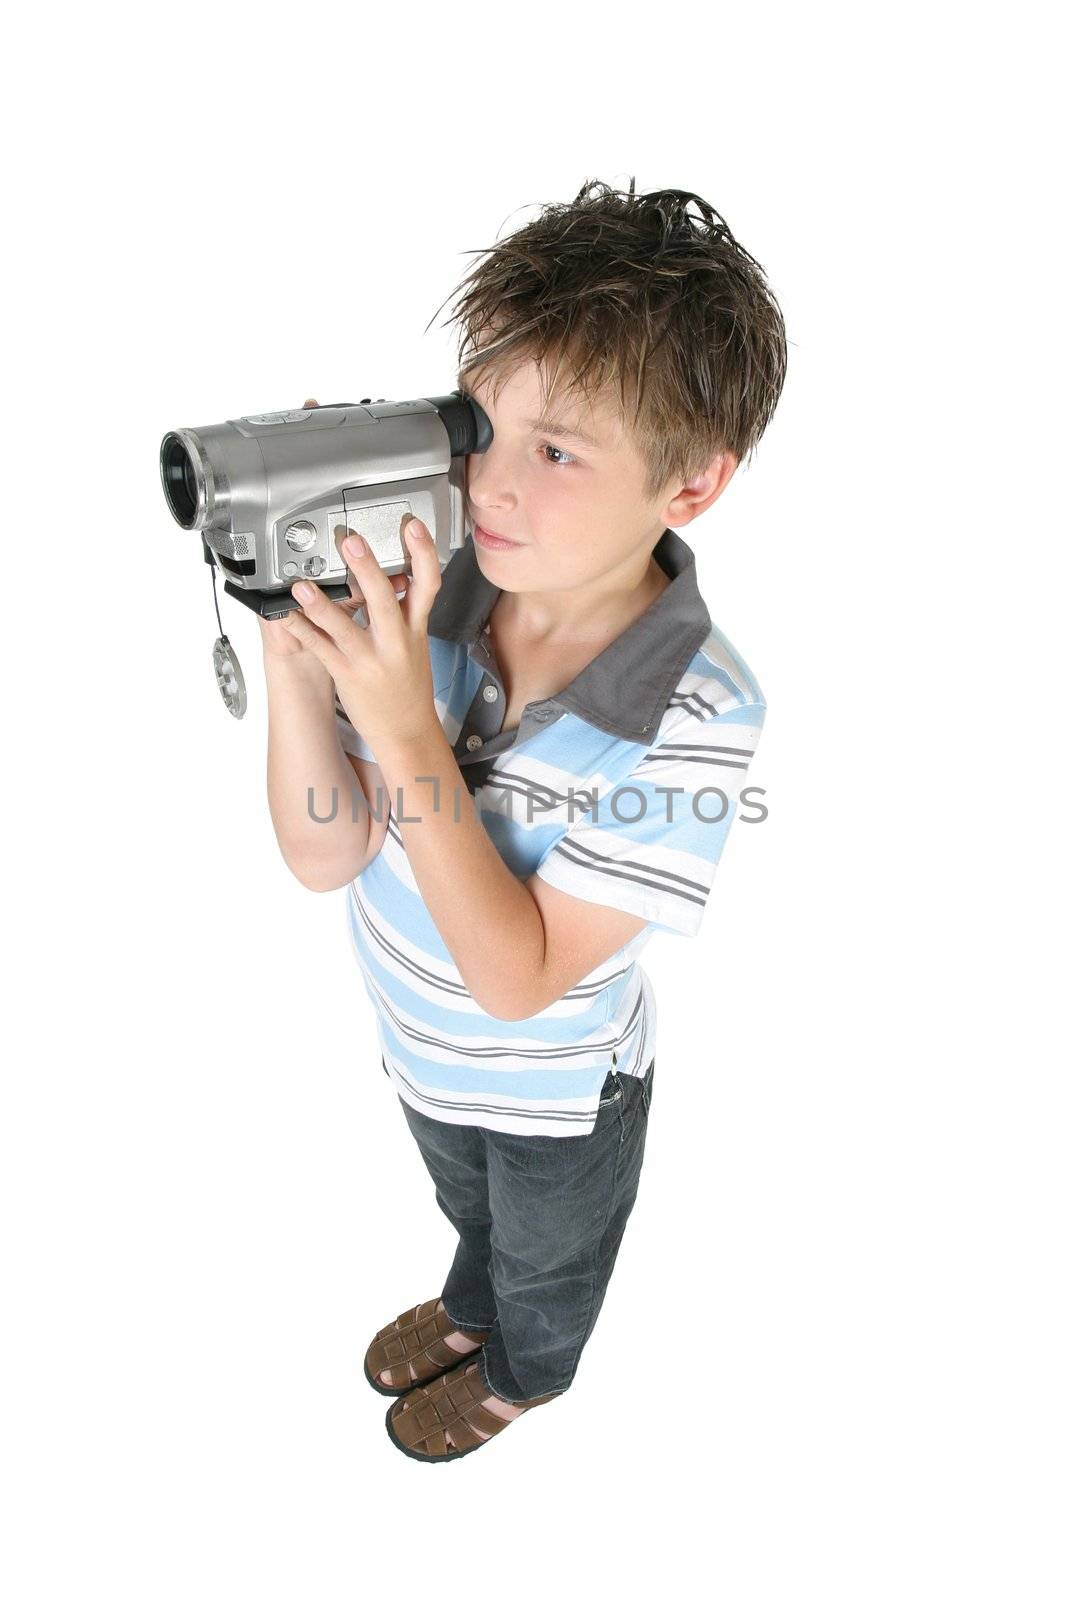 Stamding boy filming with a digital video camera.   White background,